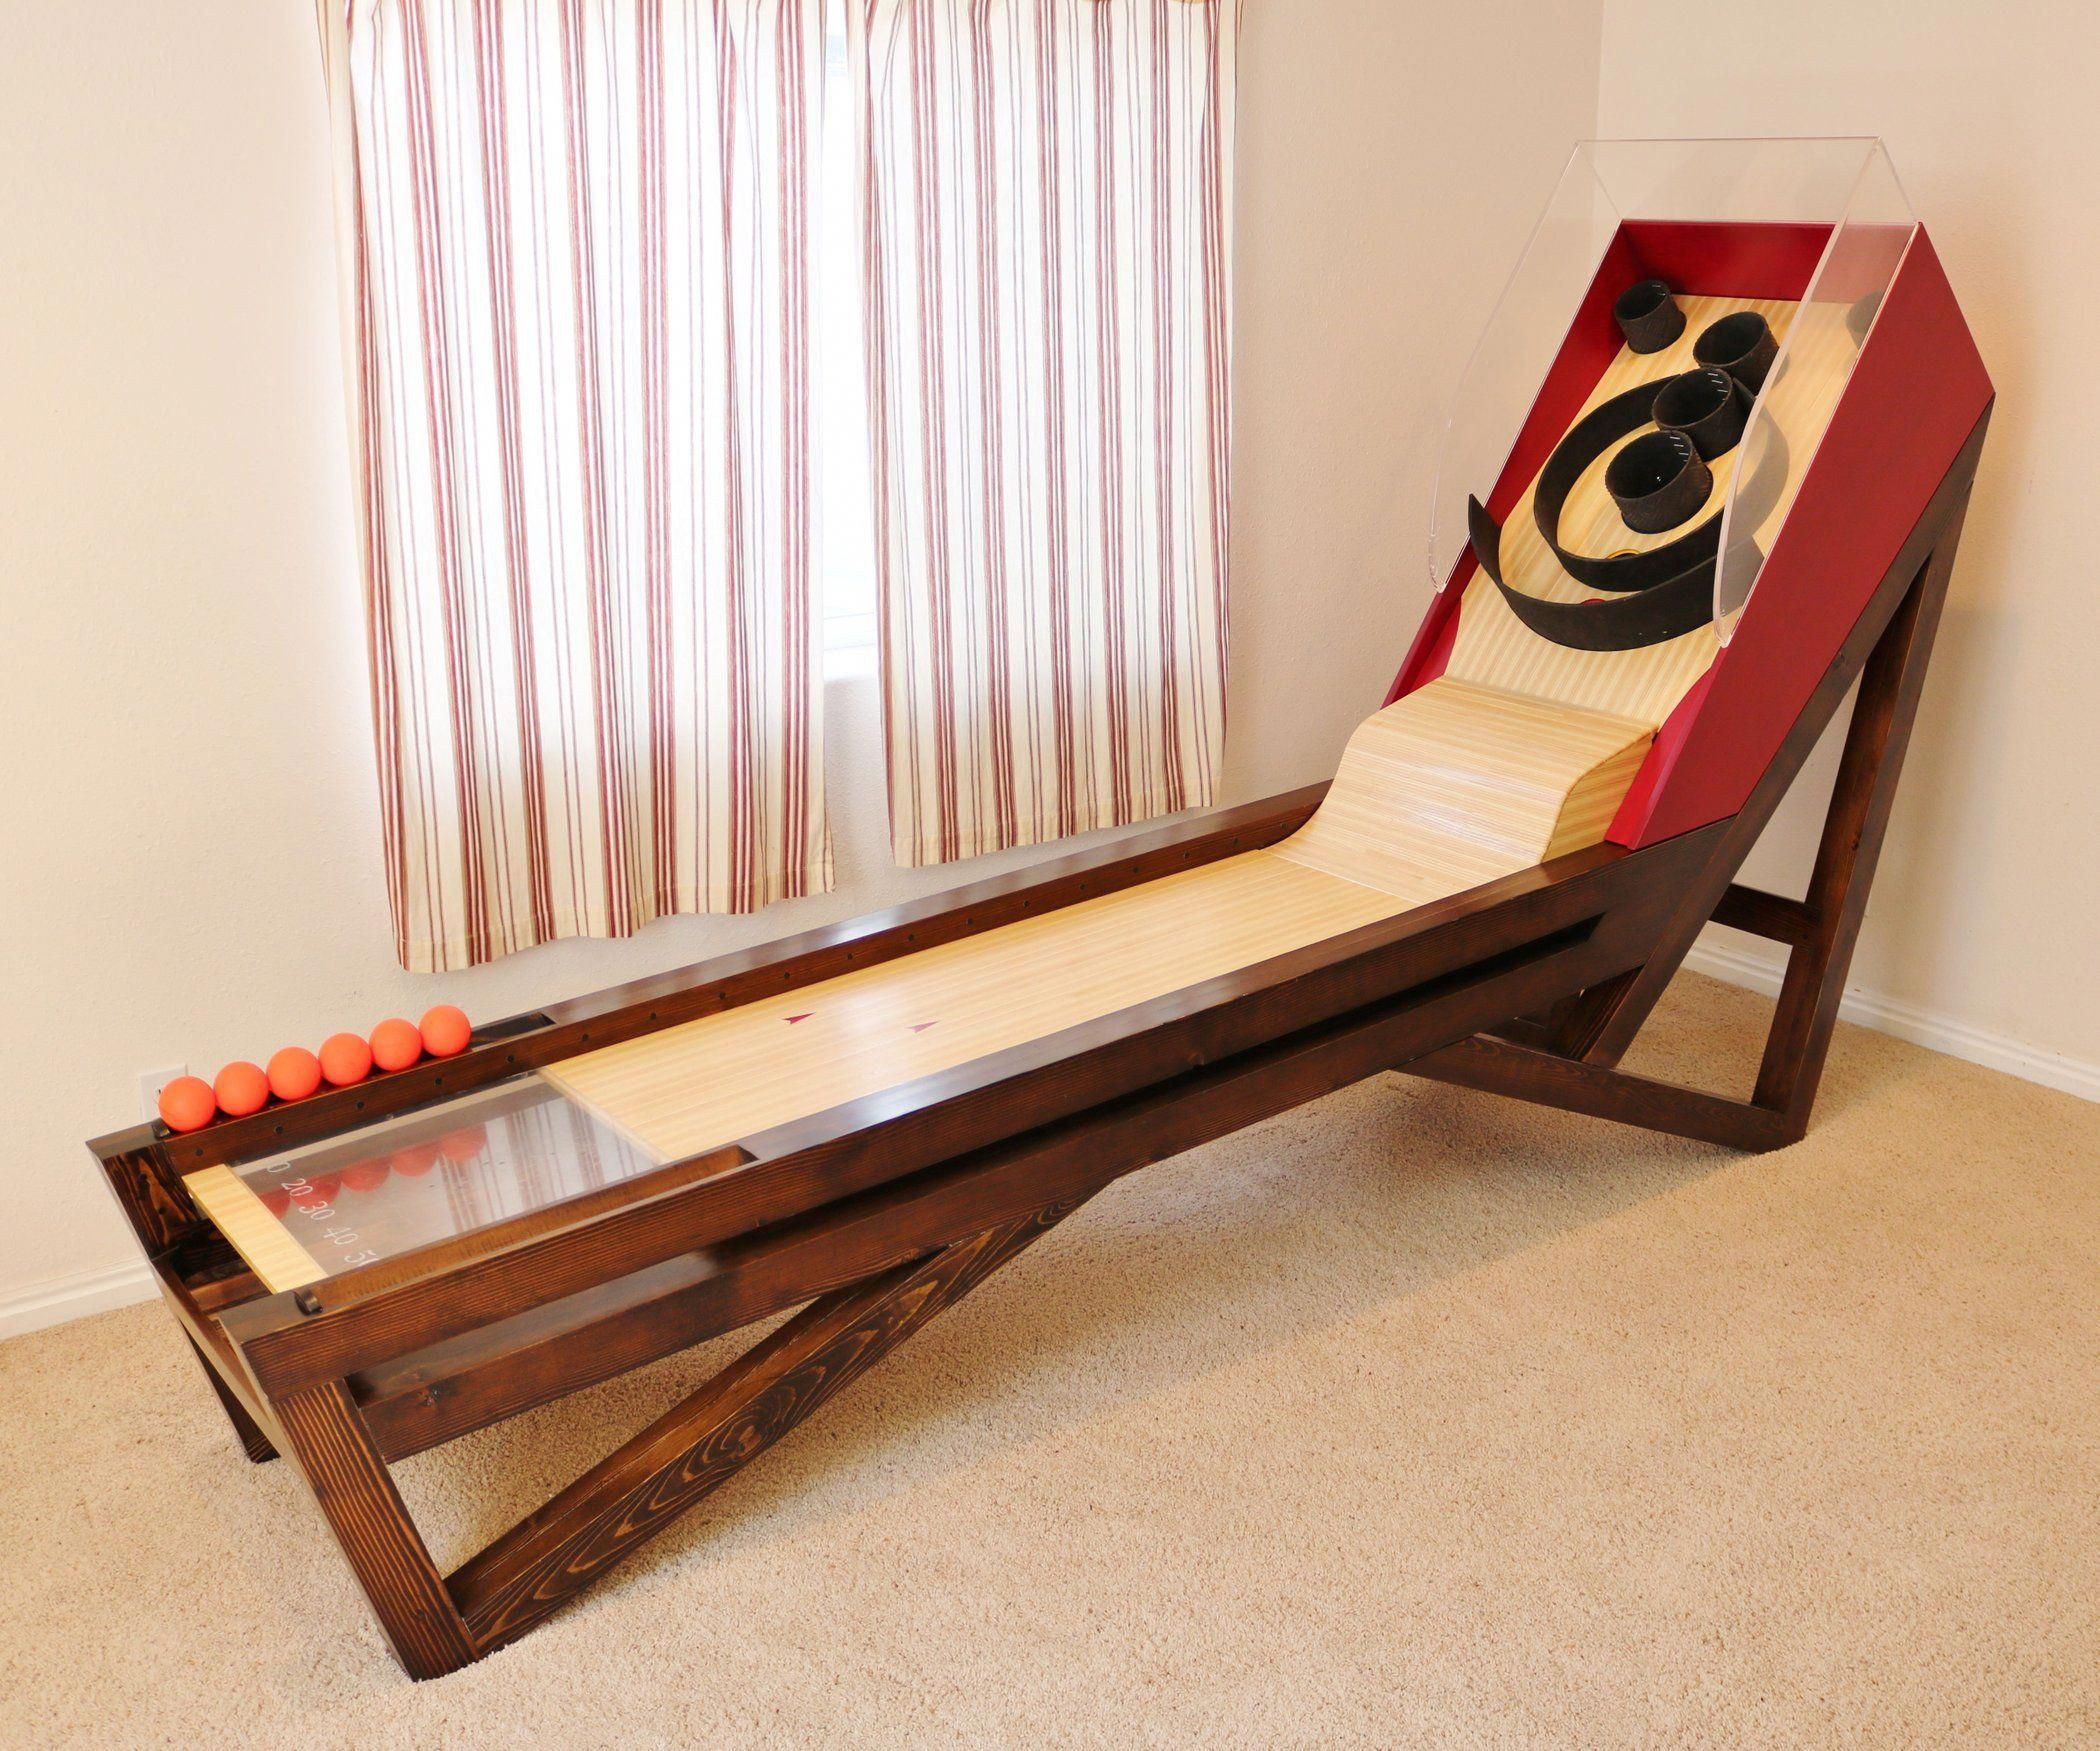 DIY Wooden Games
 This is a wooden skeeball game I made I built a smaller